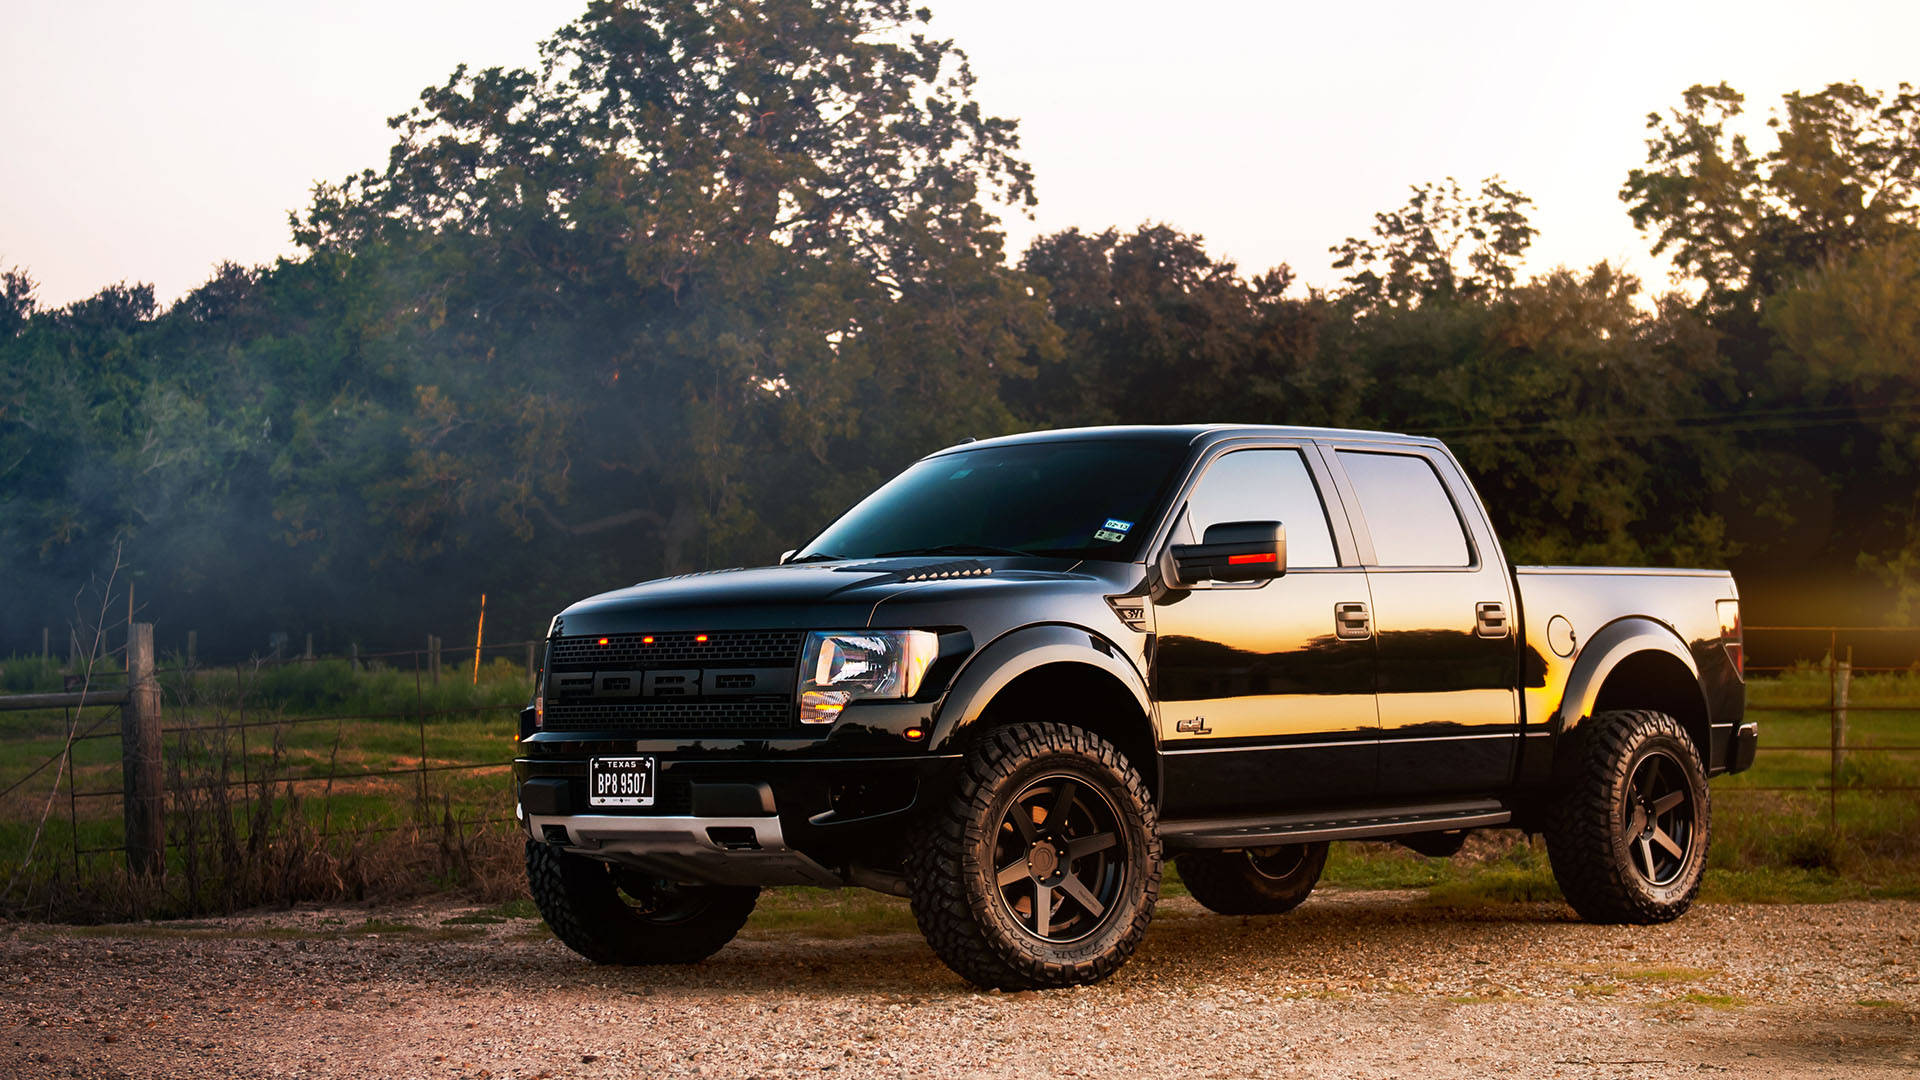 Ford Raptor In Shiny Black Paint Picture